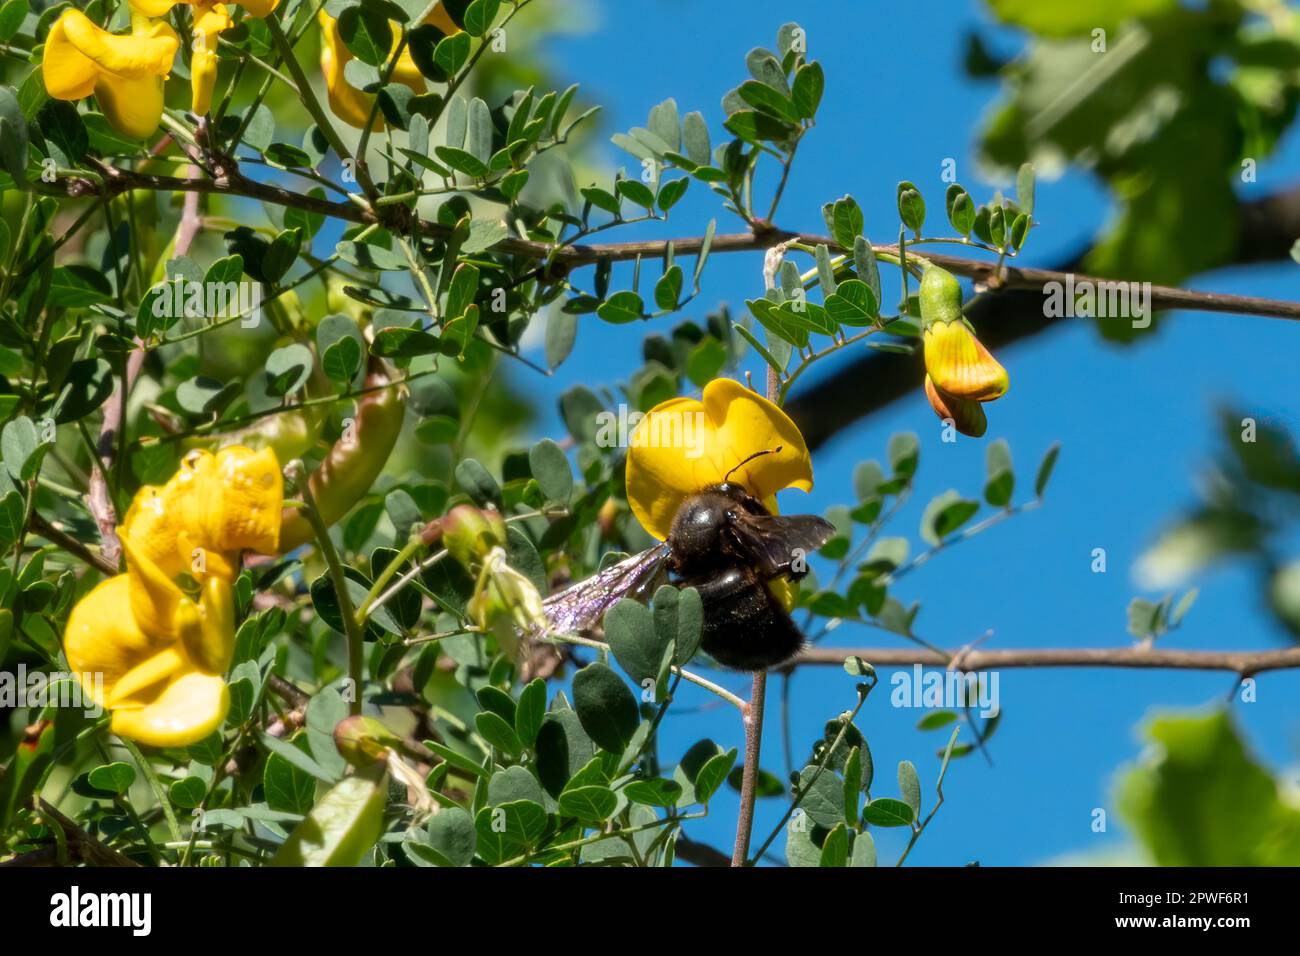 A bumblebee sucking on a yellow flower Stock Photo